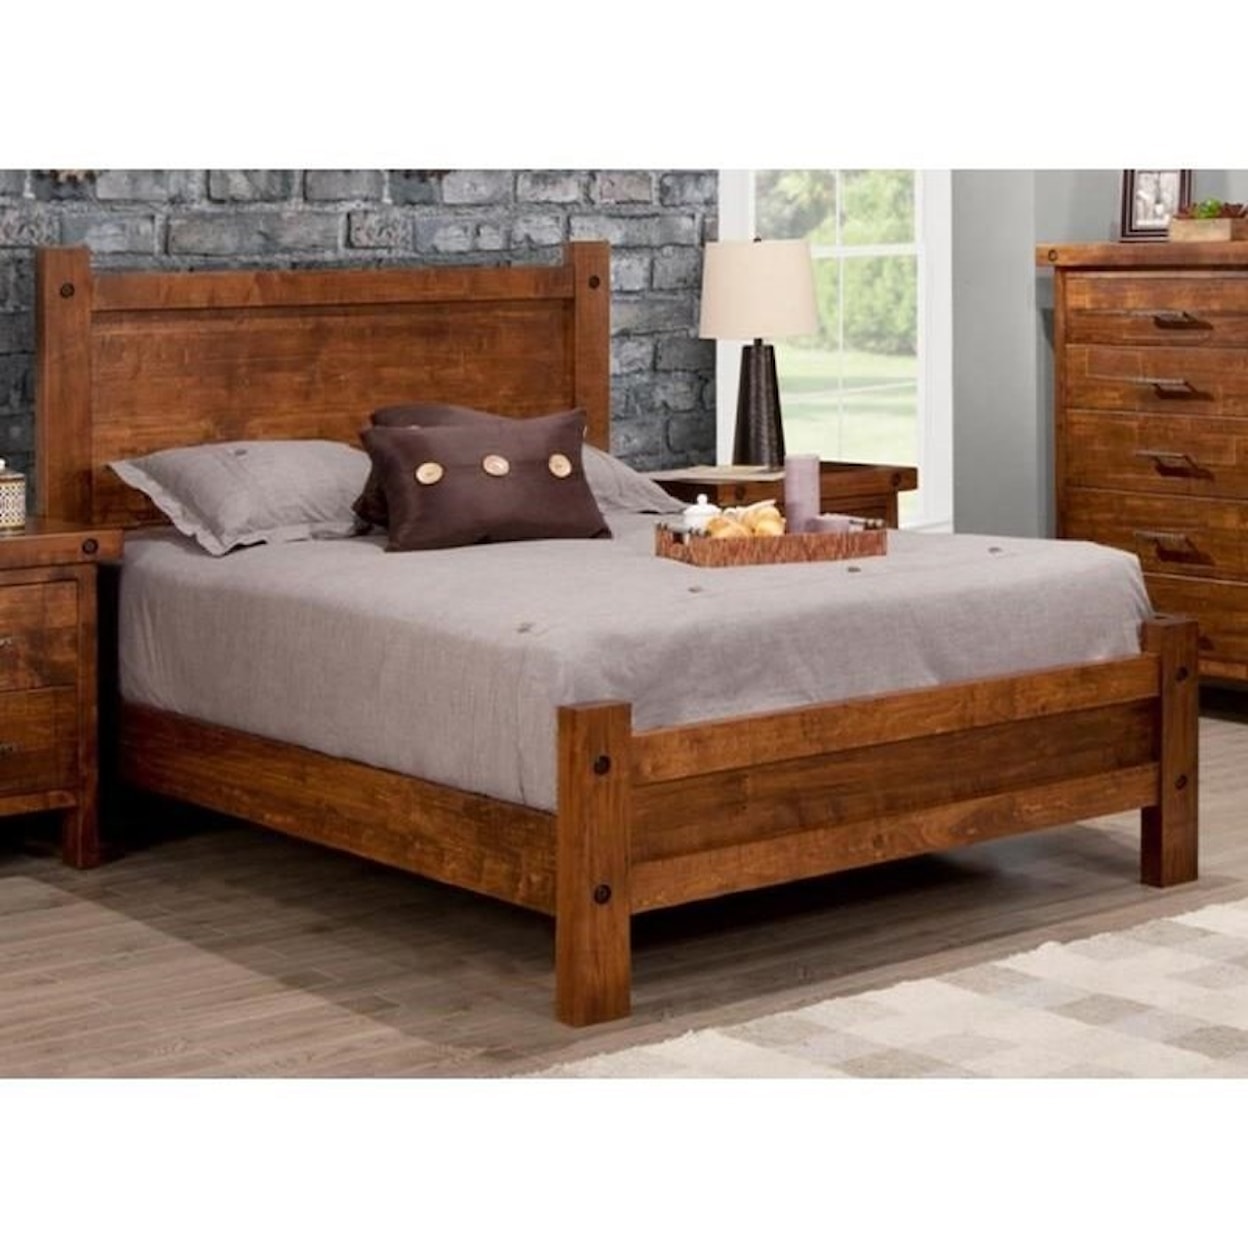 Handstone Rafters Queen Bed with Low Footboard